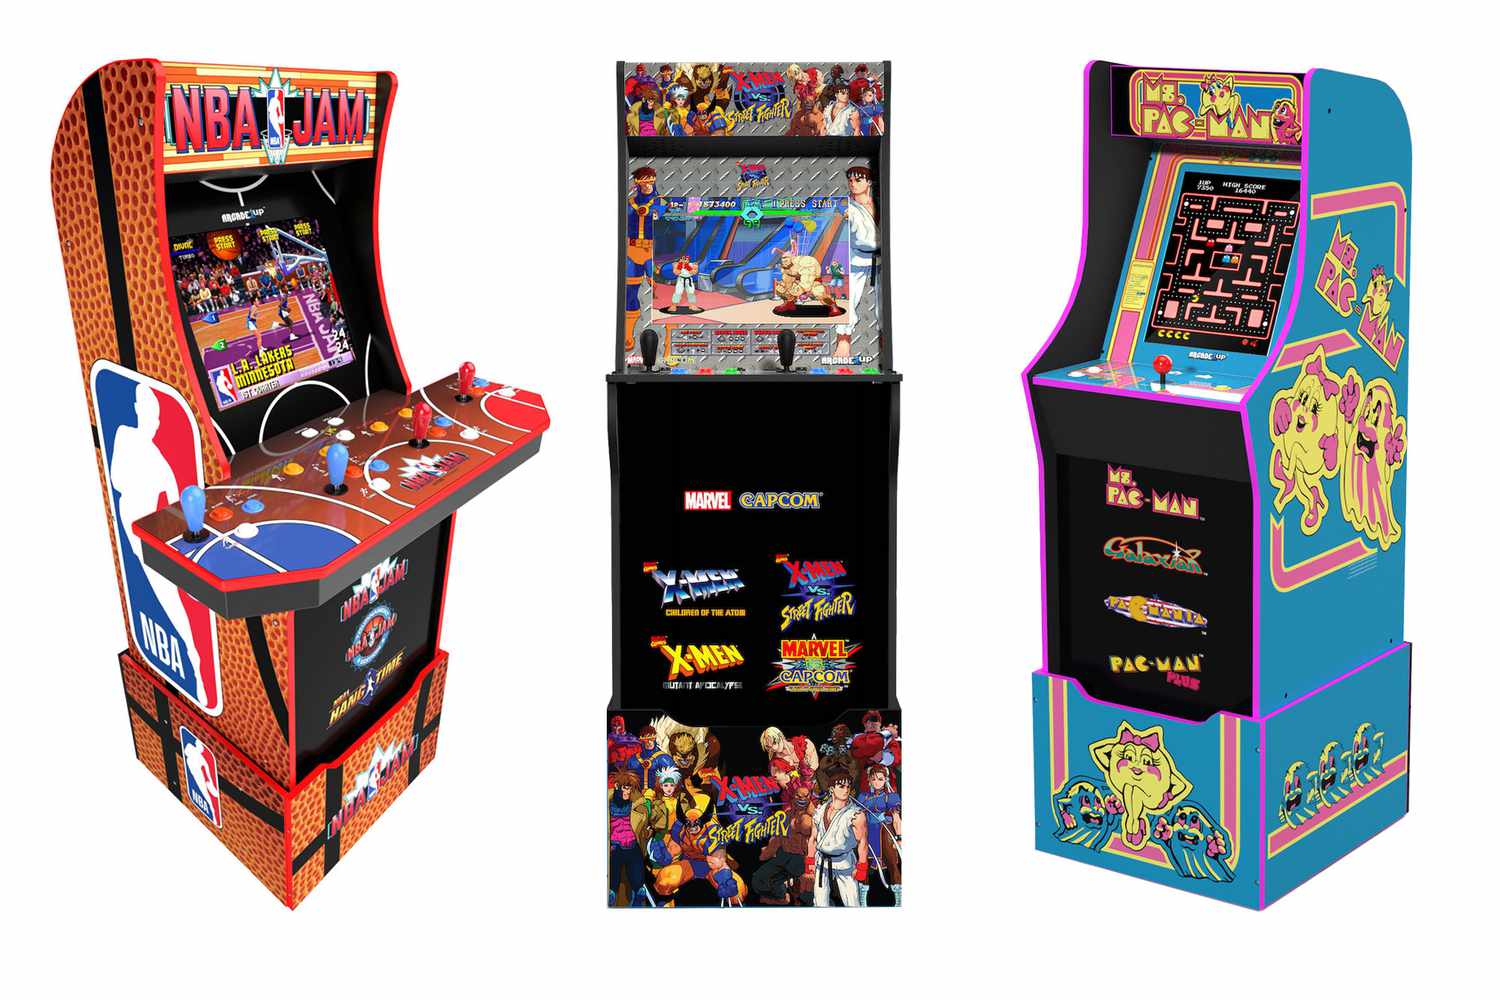 Set up a home arcade with these retro game machines from Walmart 